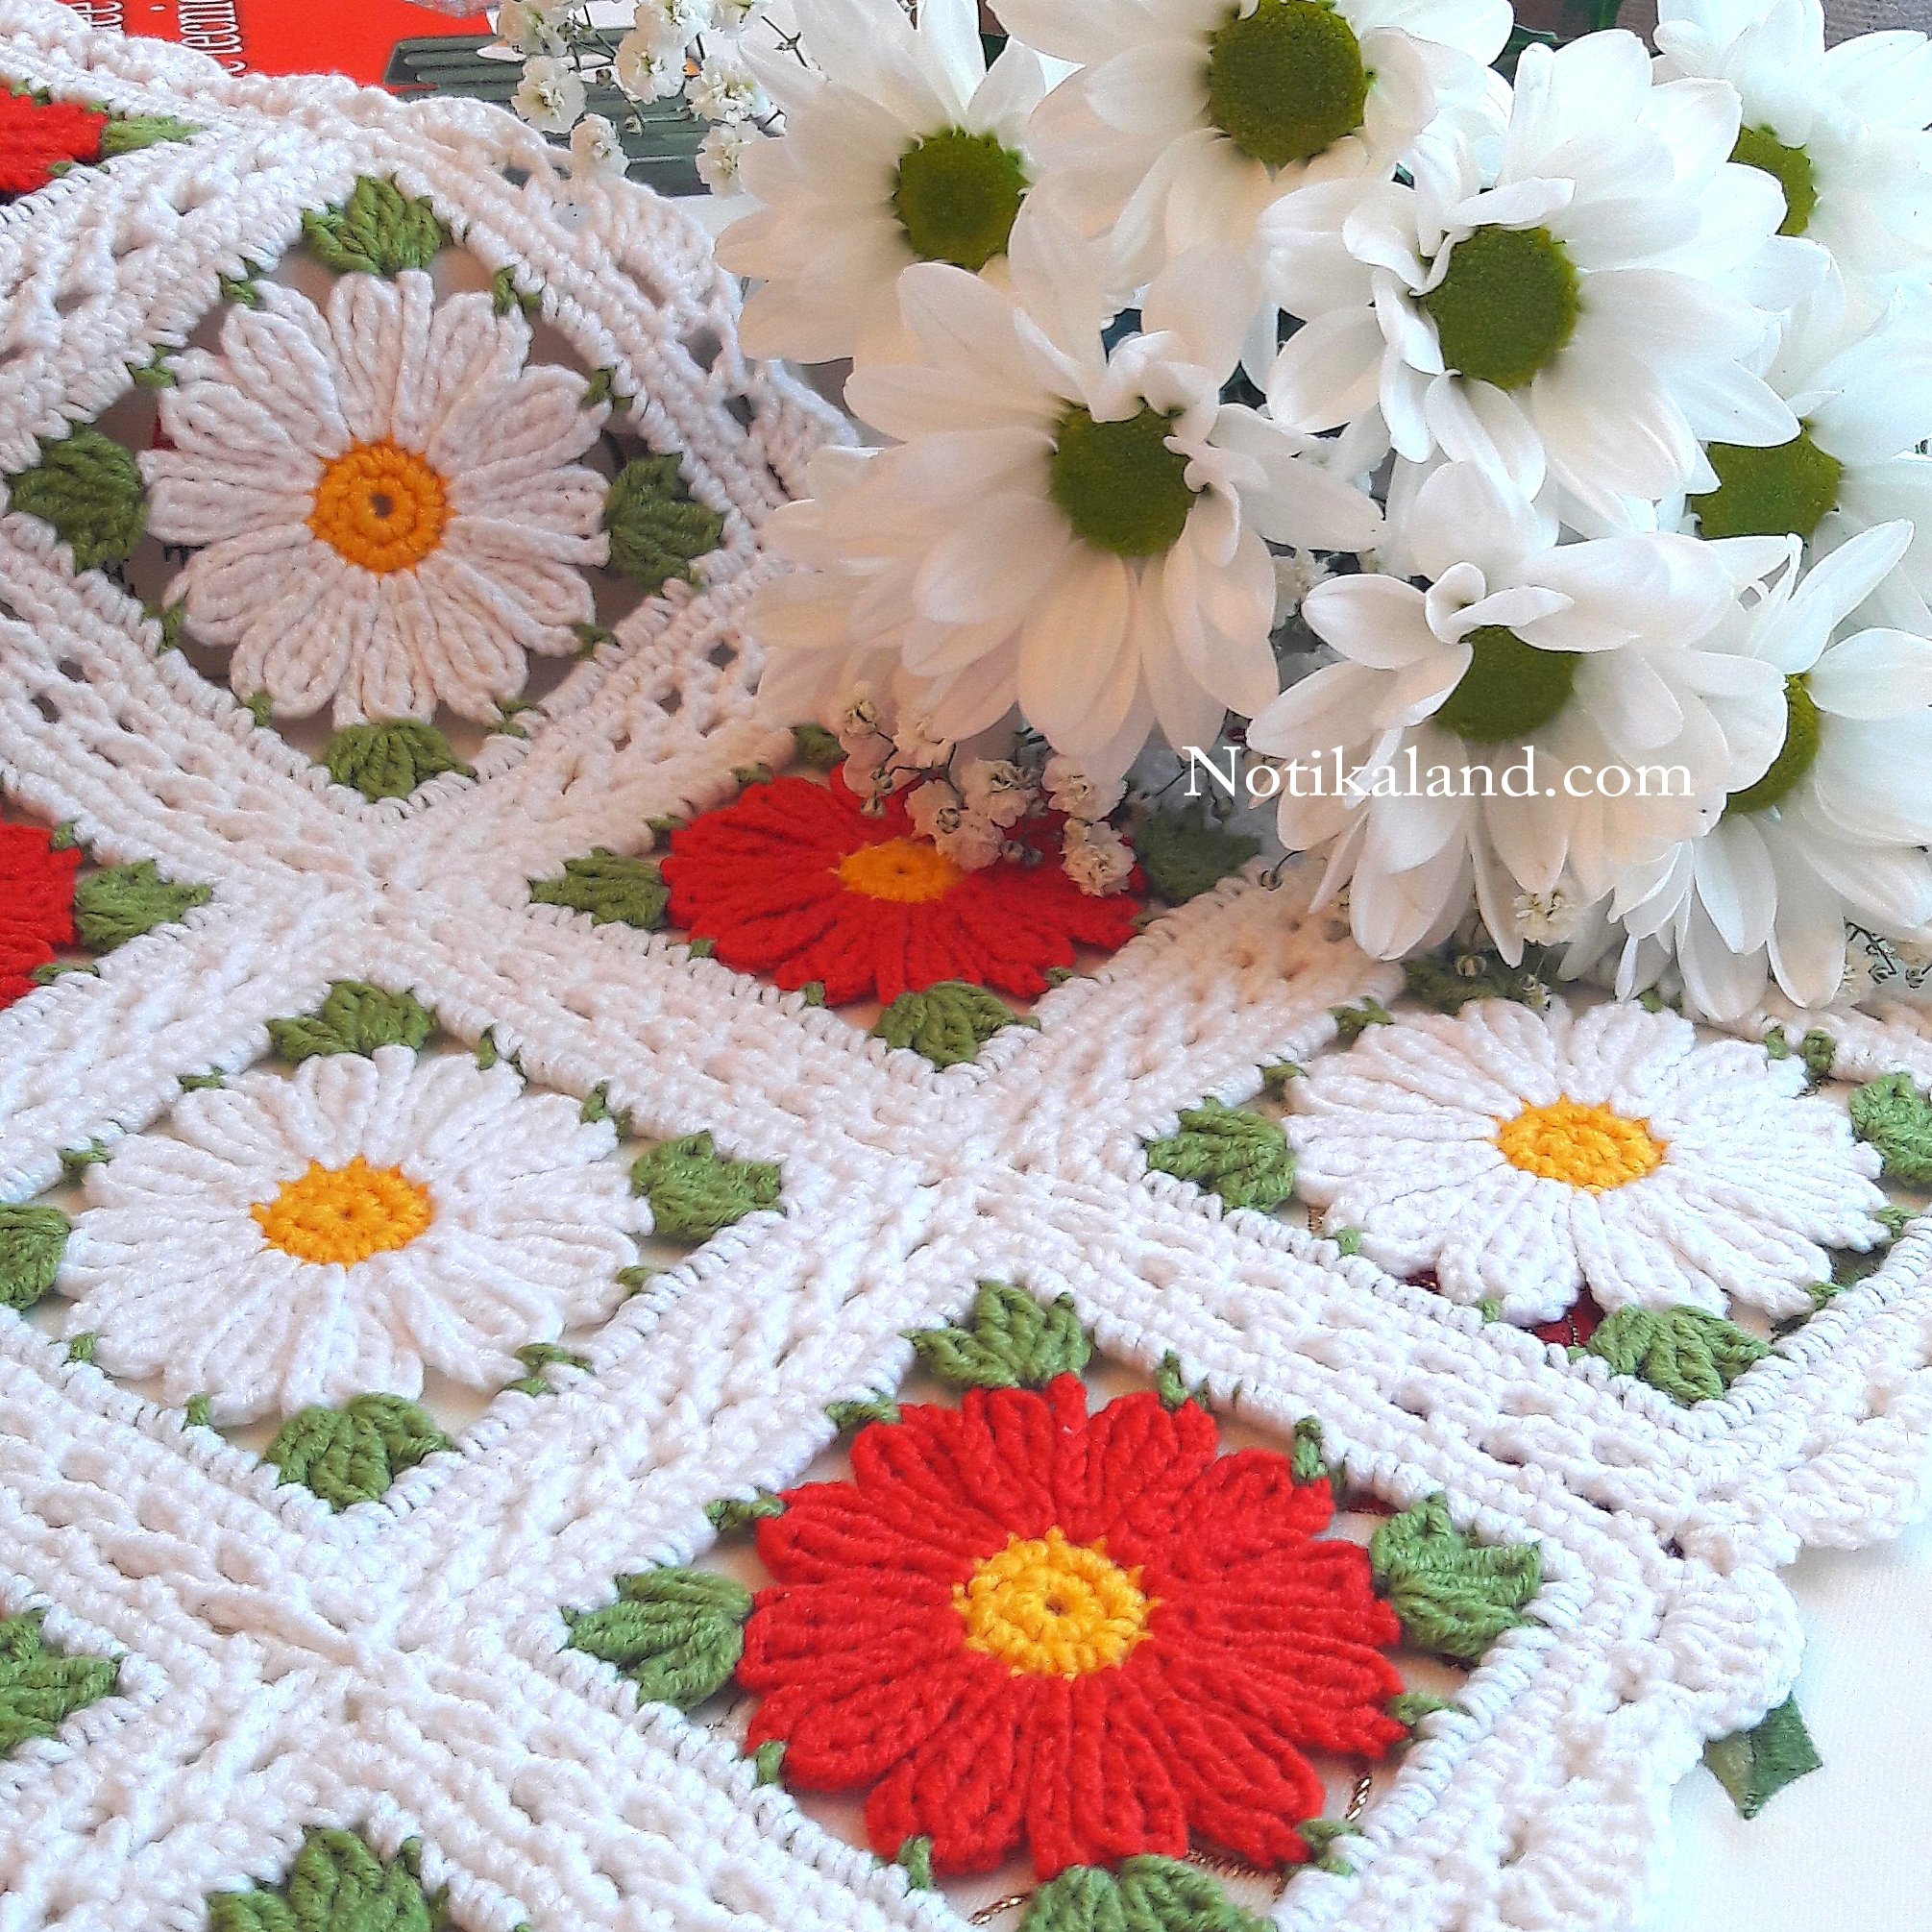 Granny square Motif, Pattern for doily, tablecloth, blanket.